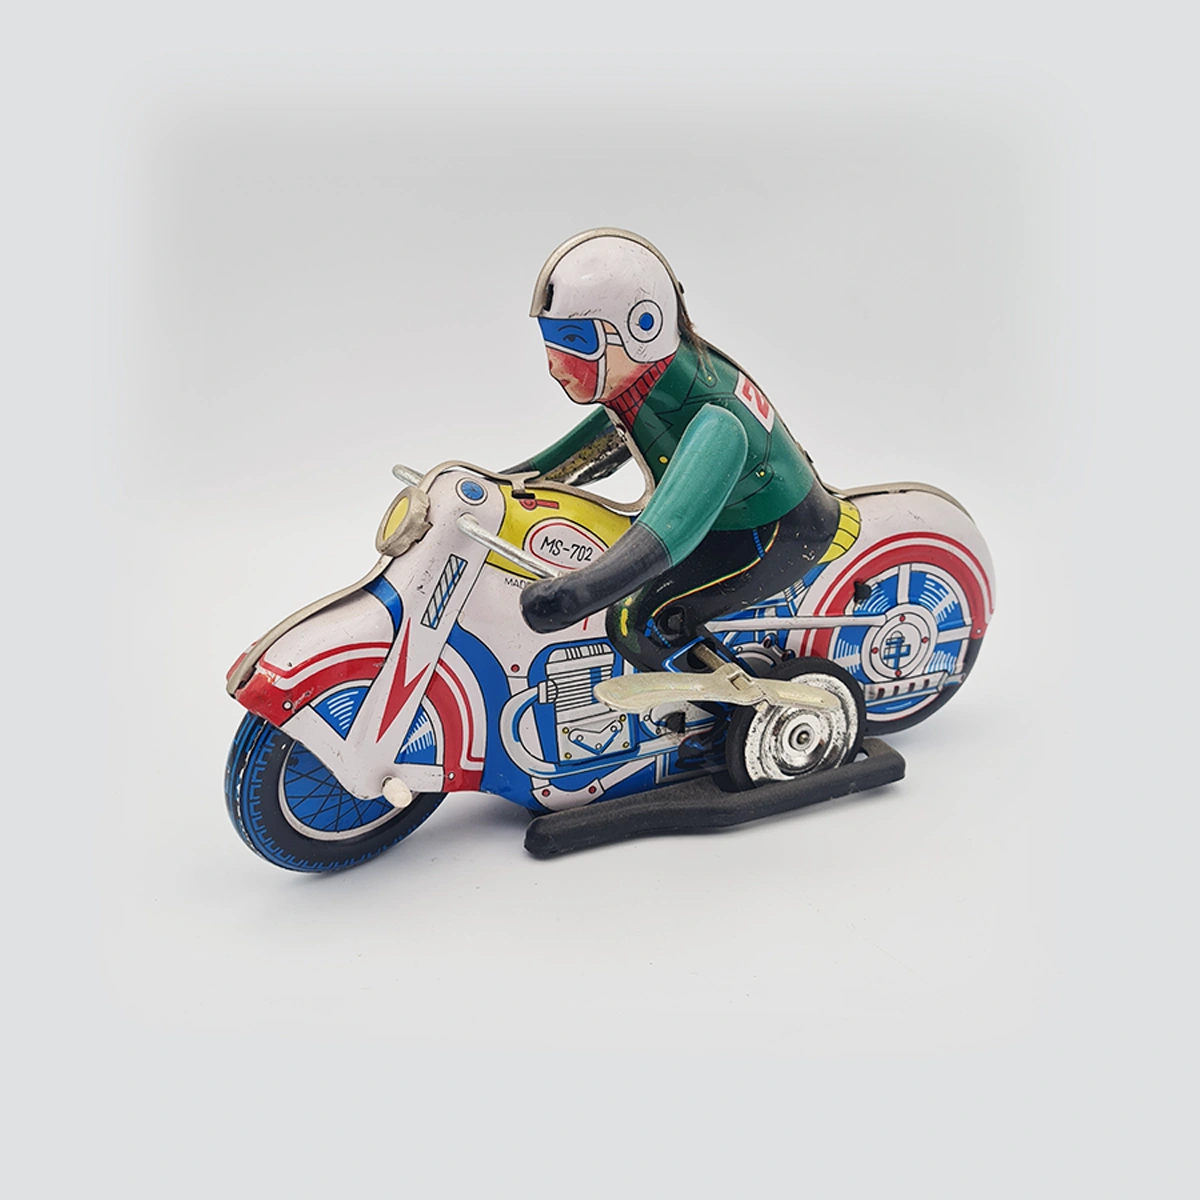 Vintage Tin Toy Motorcycle Rider China MS-702 602 Old Wind Up Friction Motor Man 3